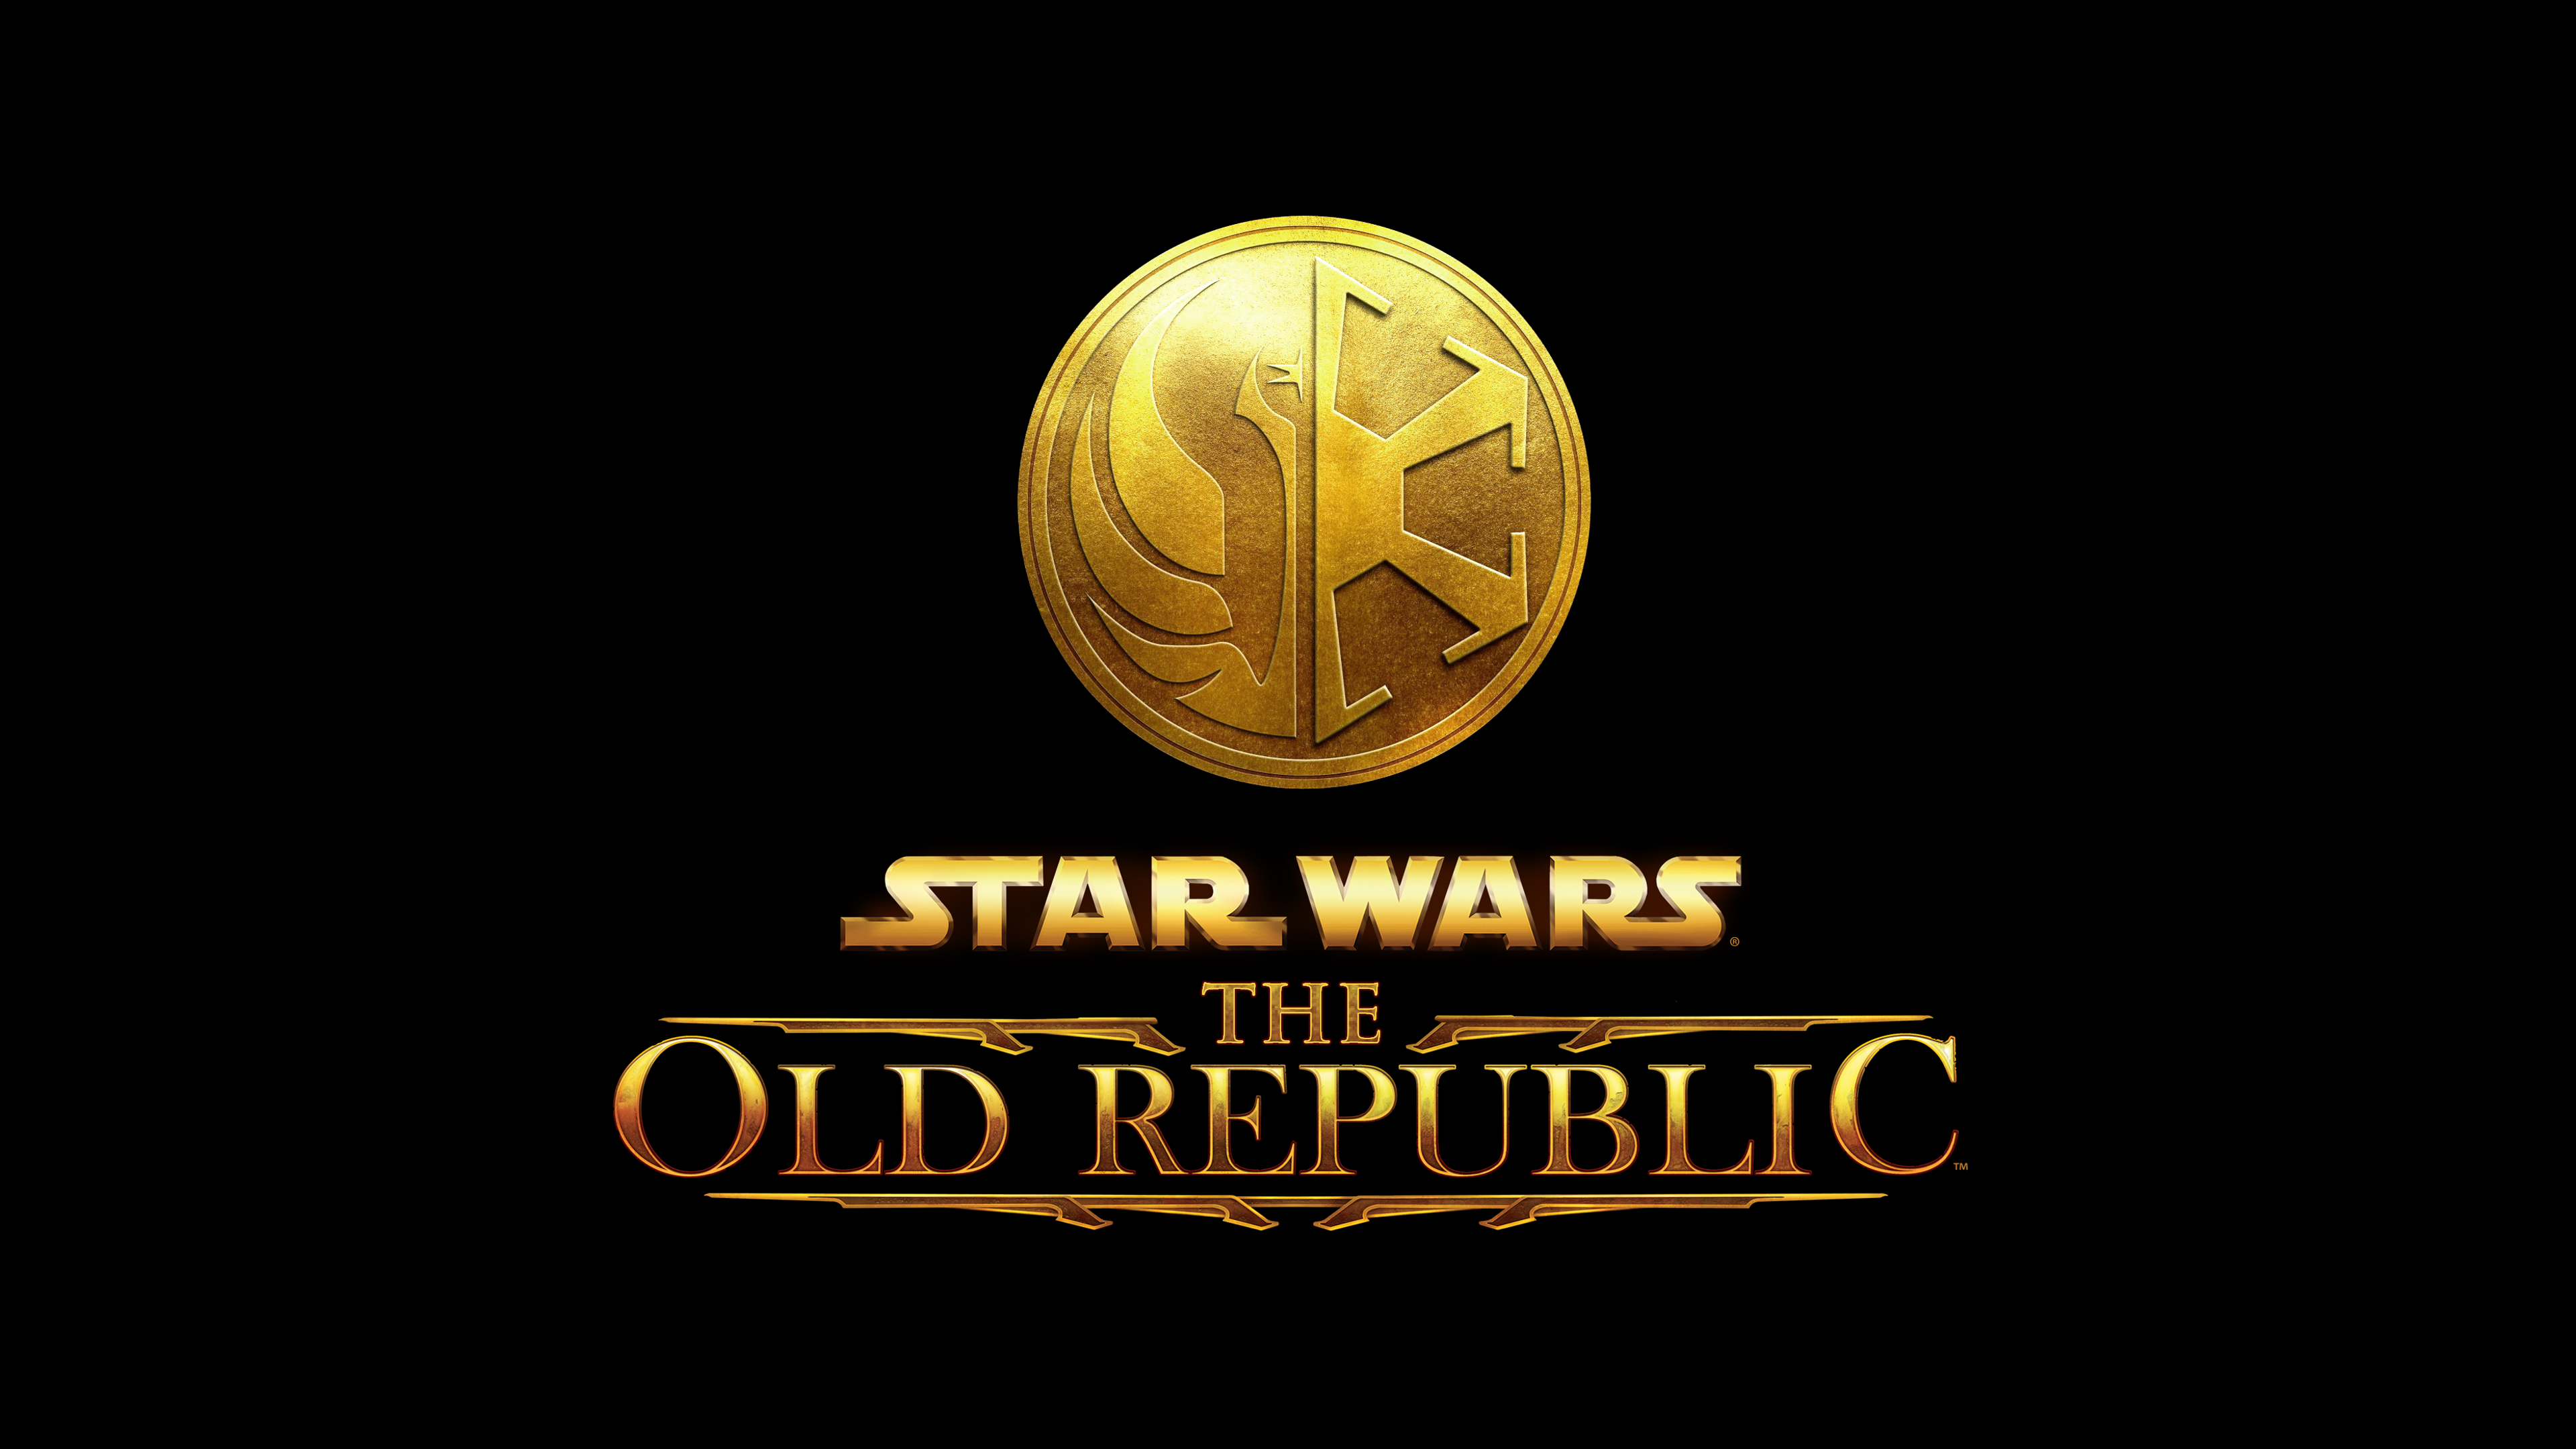 Star Wars: The Old Republic Confirms Move to Broadsword